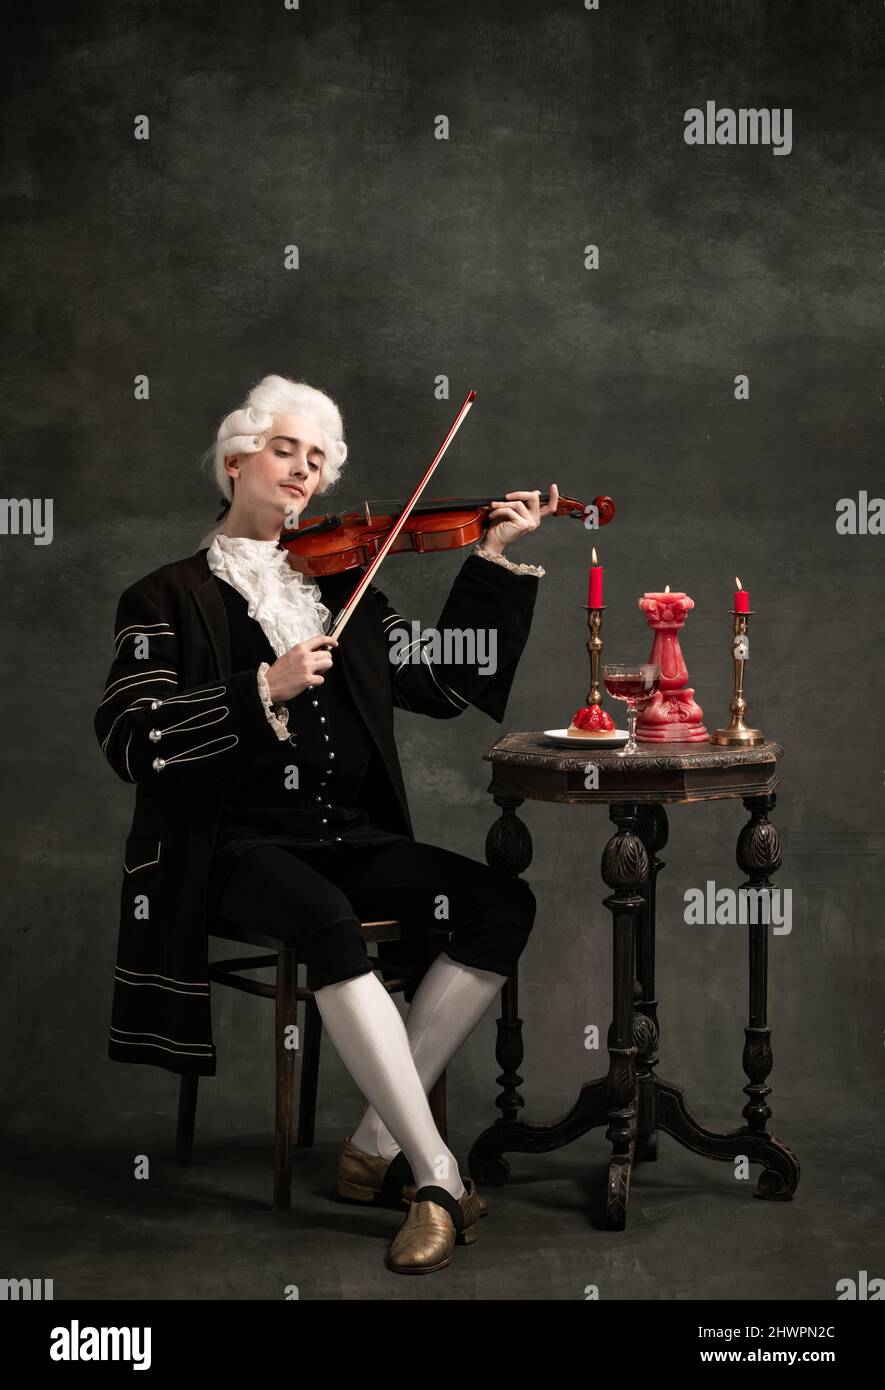 Portrait of young man wearing wig and vintage medieval outfit like famous composer playing violin isolated on dark green vintage background. Stock Photo